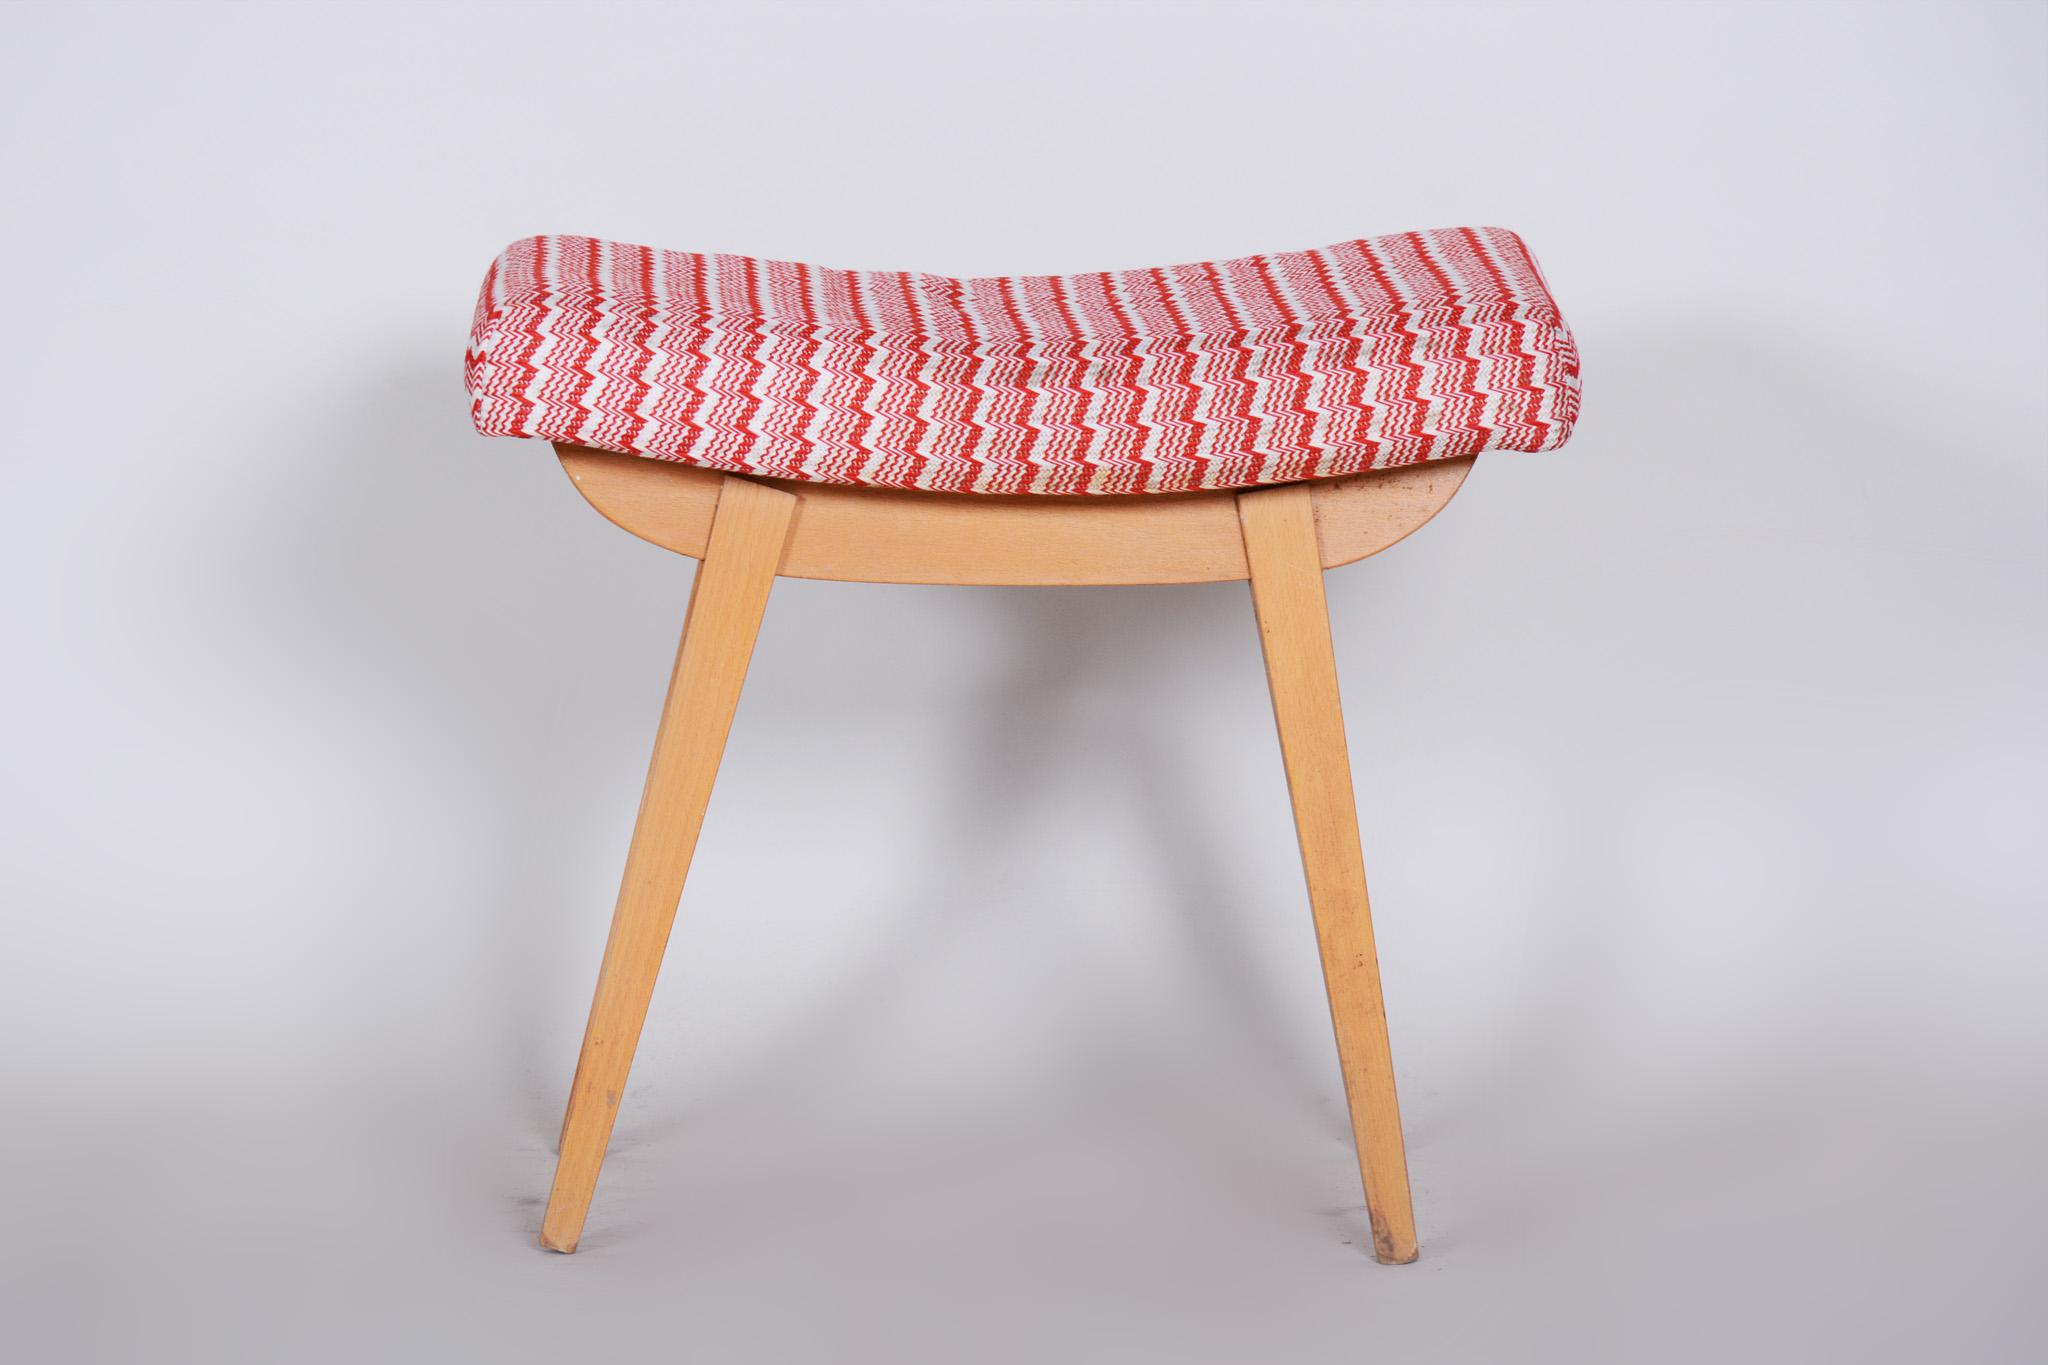 Mid-Century Modern Red and White Midcentury Beech Stool, 1960s, Original Preserved Condition For Sale